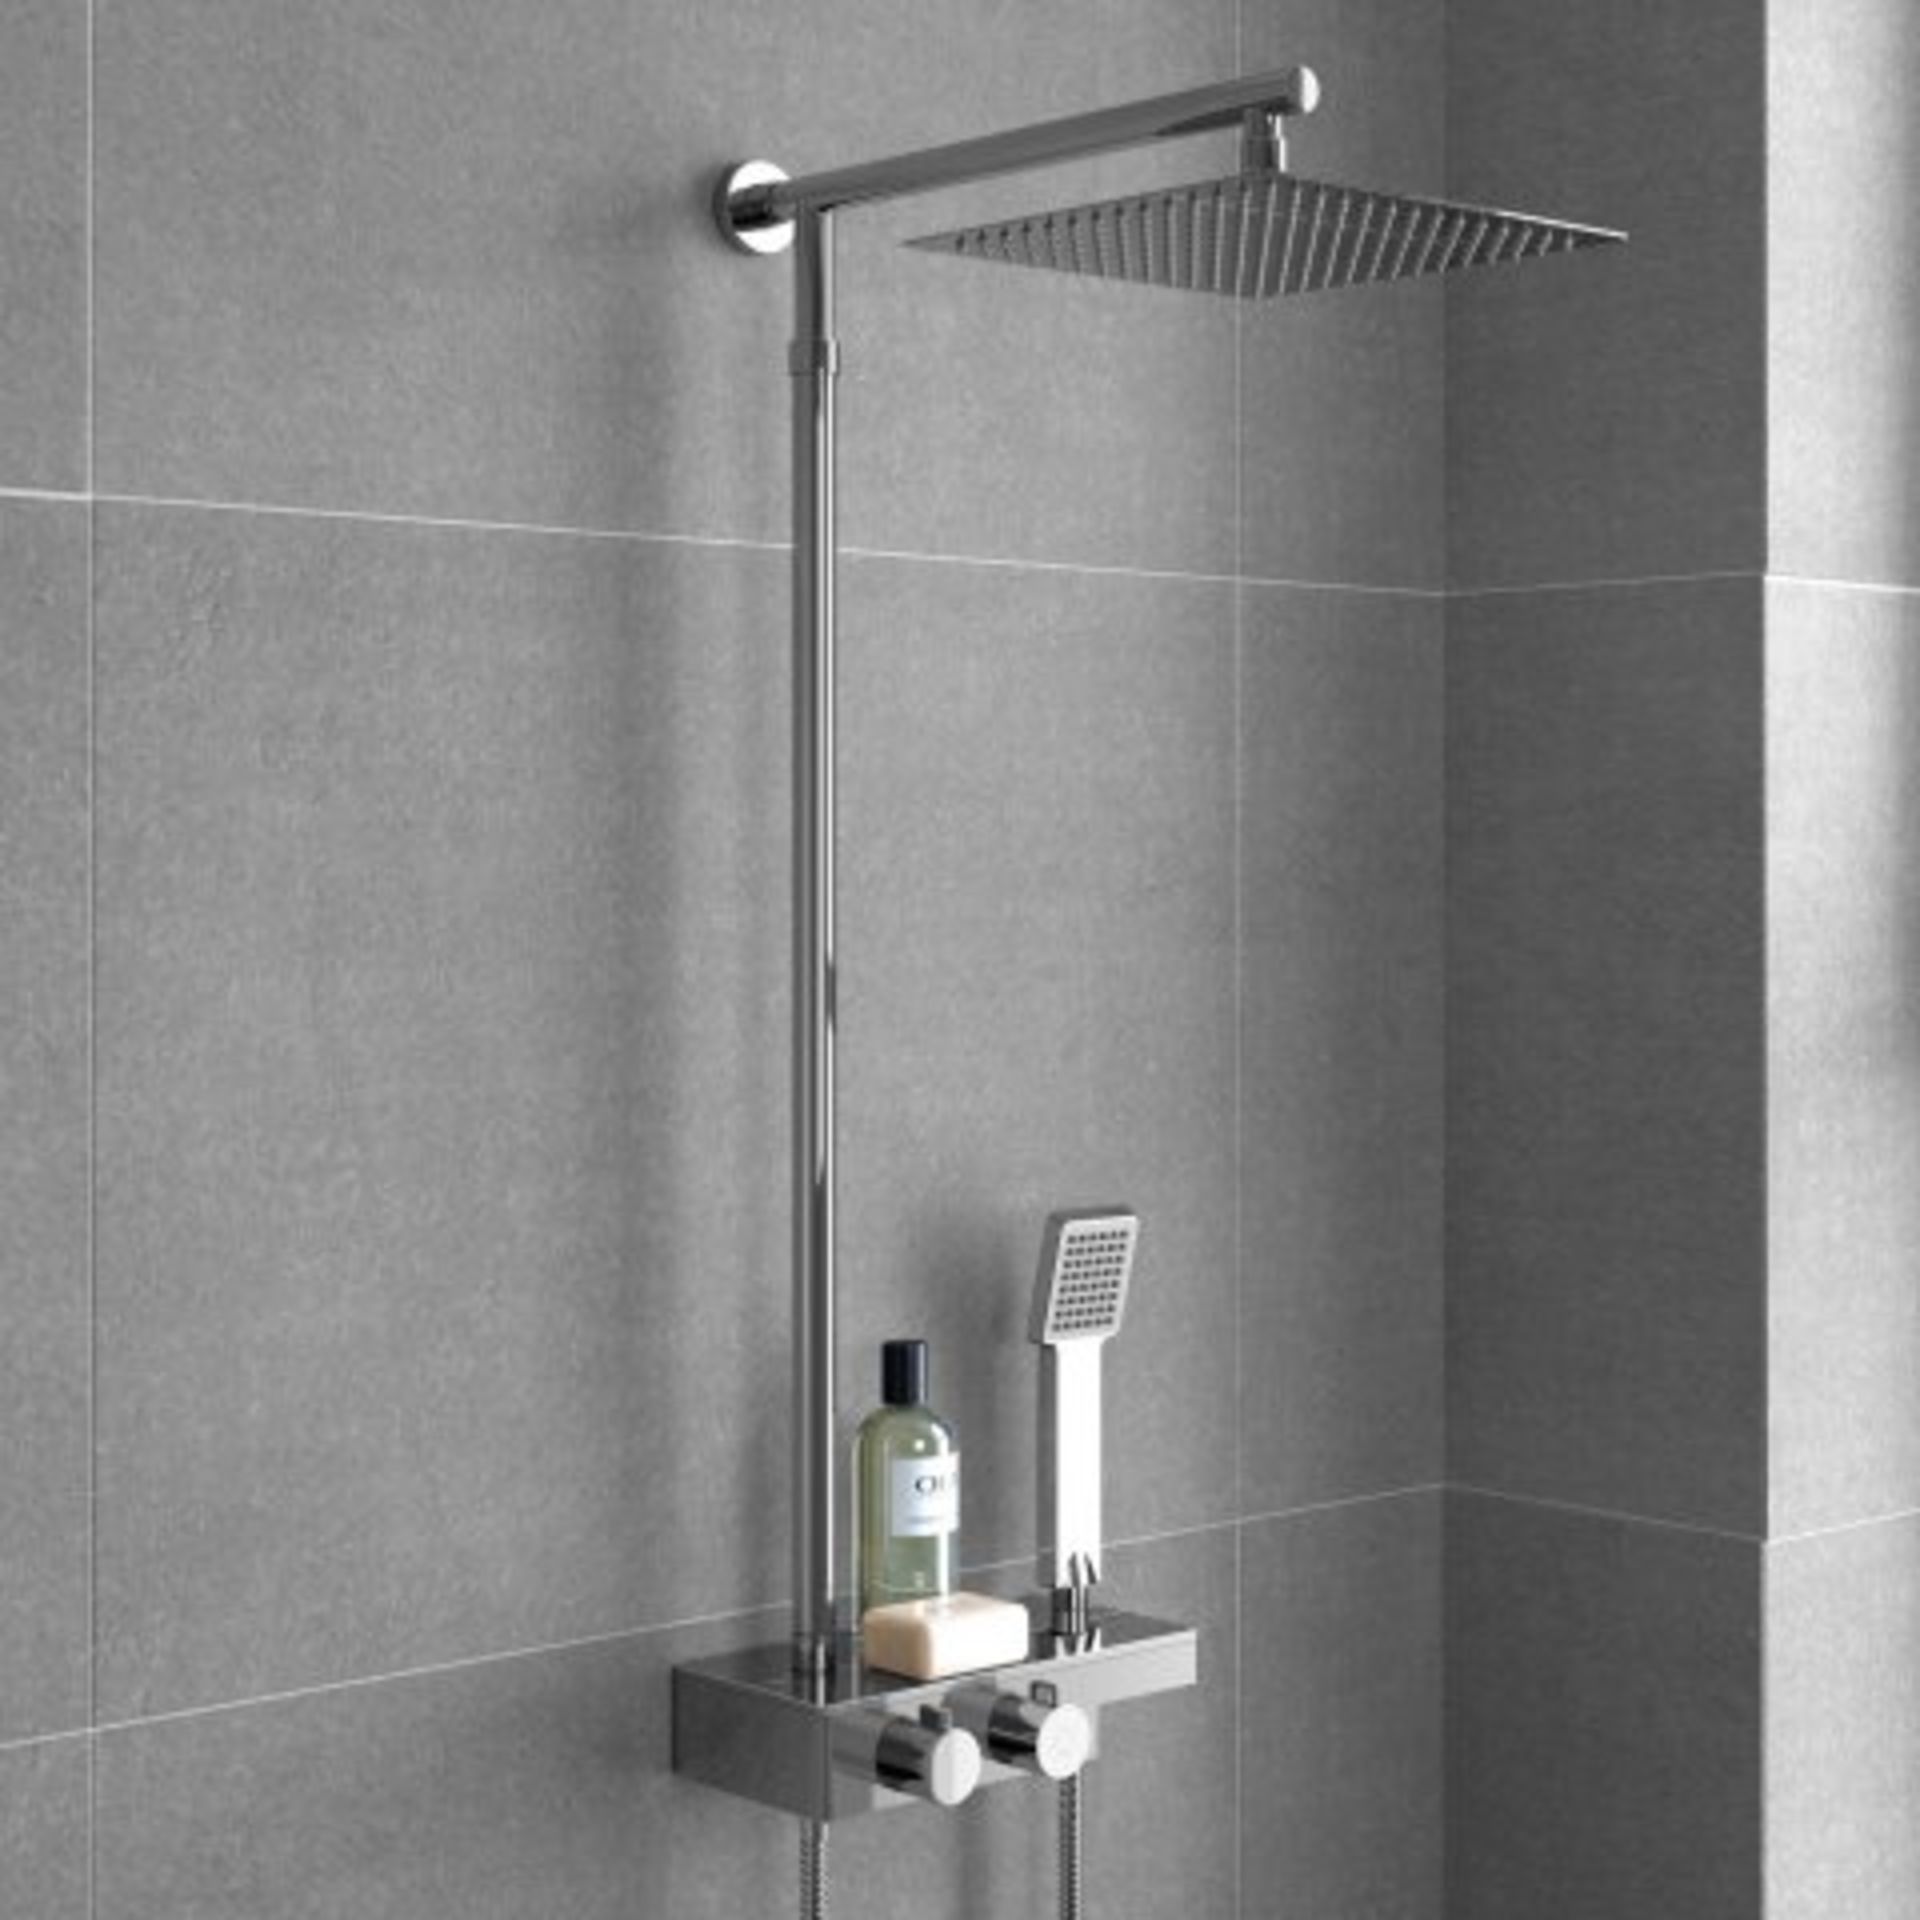 (2) 250mm Large Square Head Thermostatic Exposed Shower Kit, Handheld & Storage Shelf. RRP £349. - Image 3 of 5